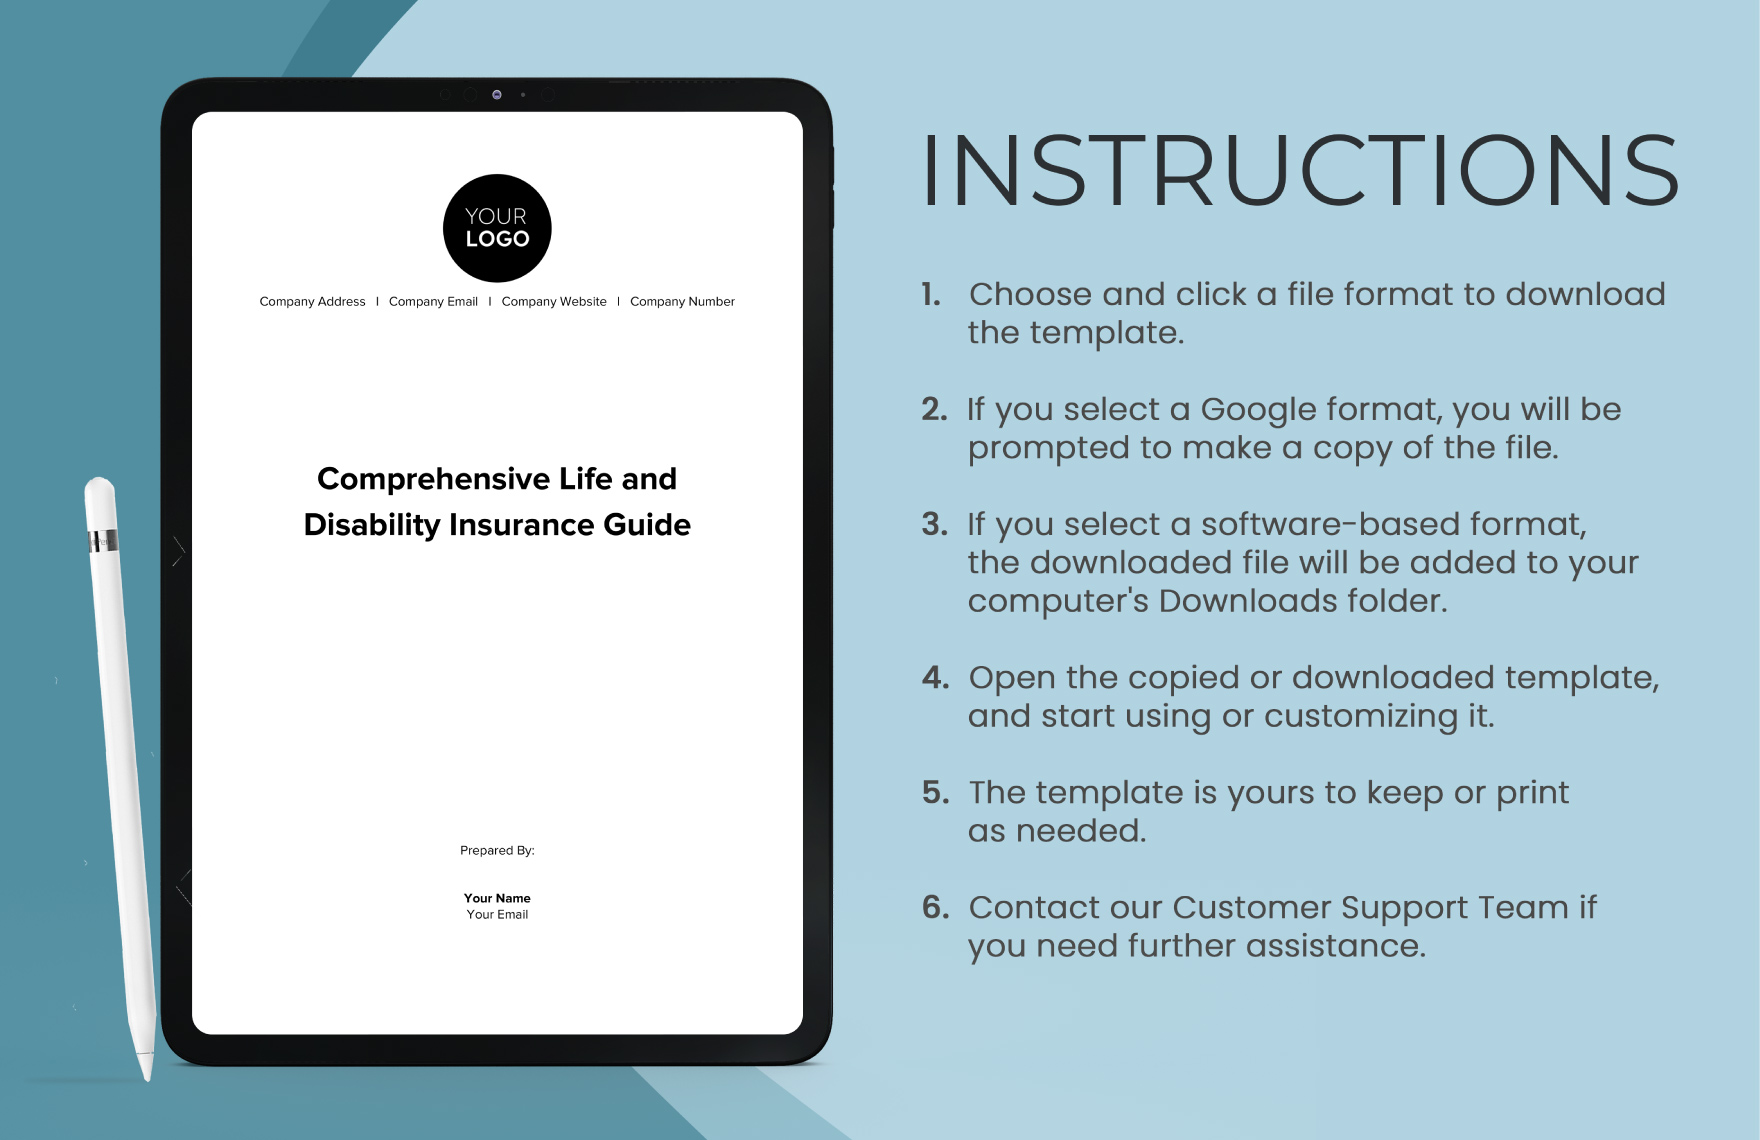 Comprehensive Life and Disability Insurance Guide HR Template